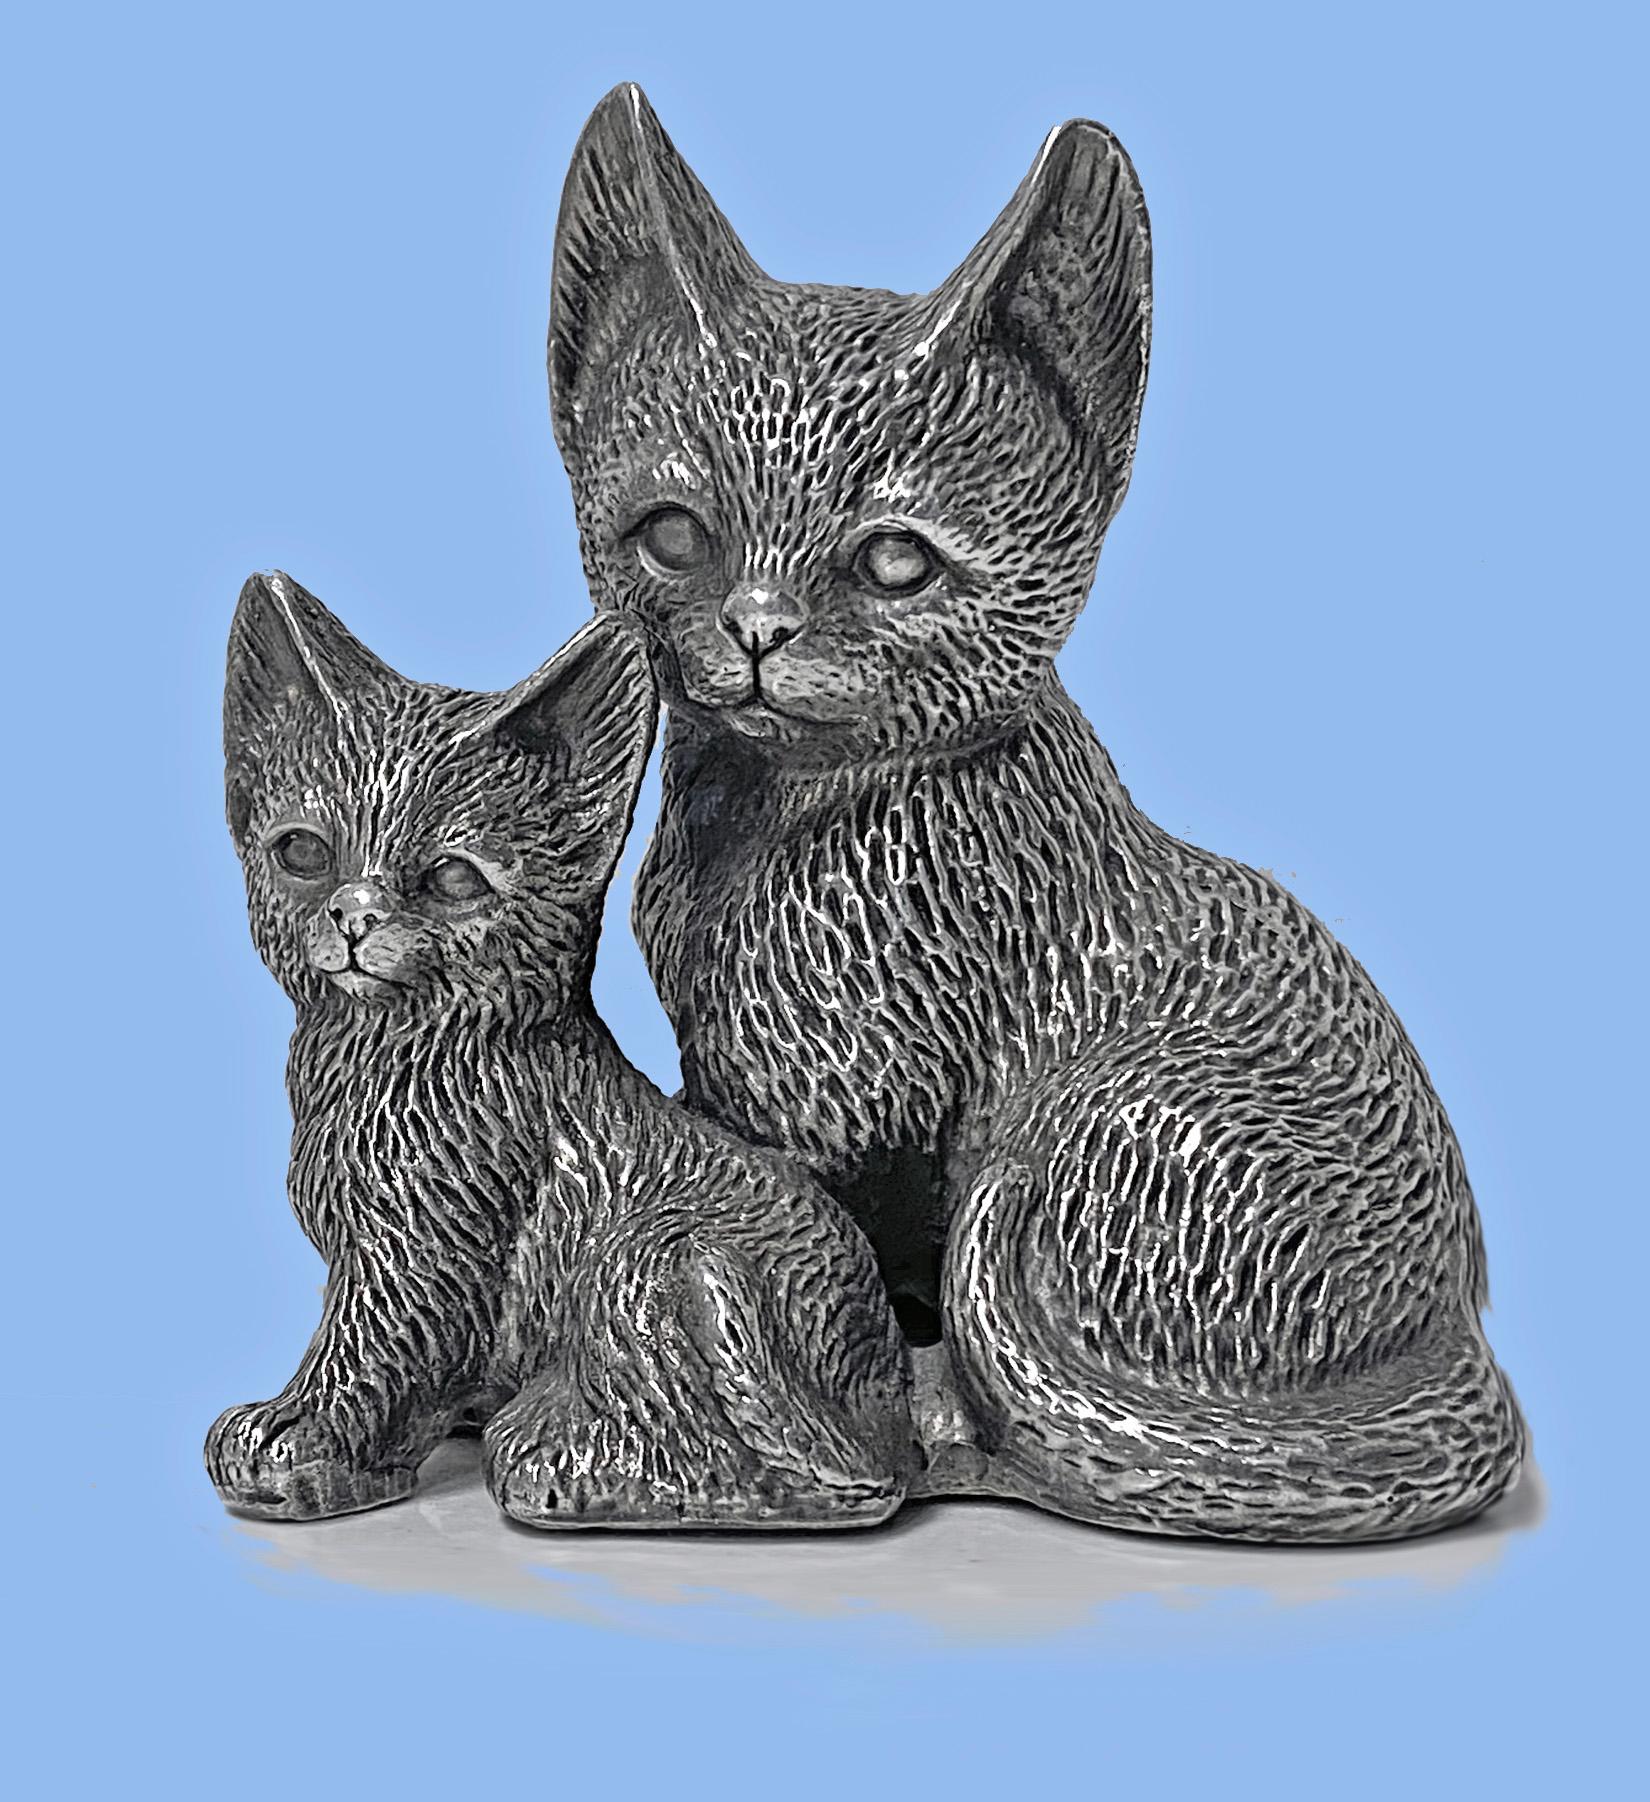 Silver 925 seated Cat and Kitten sculpture 1960’s. Realistically modelled seated cat and kitten, stamped underside Tekform 925 Silver pt. Measures: 3.50 x 4.00 x 3.625 inches. Item Weight: 283 grams. Resin filled interior.